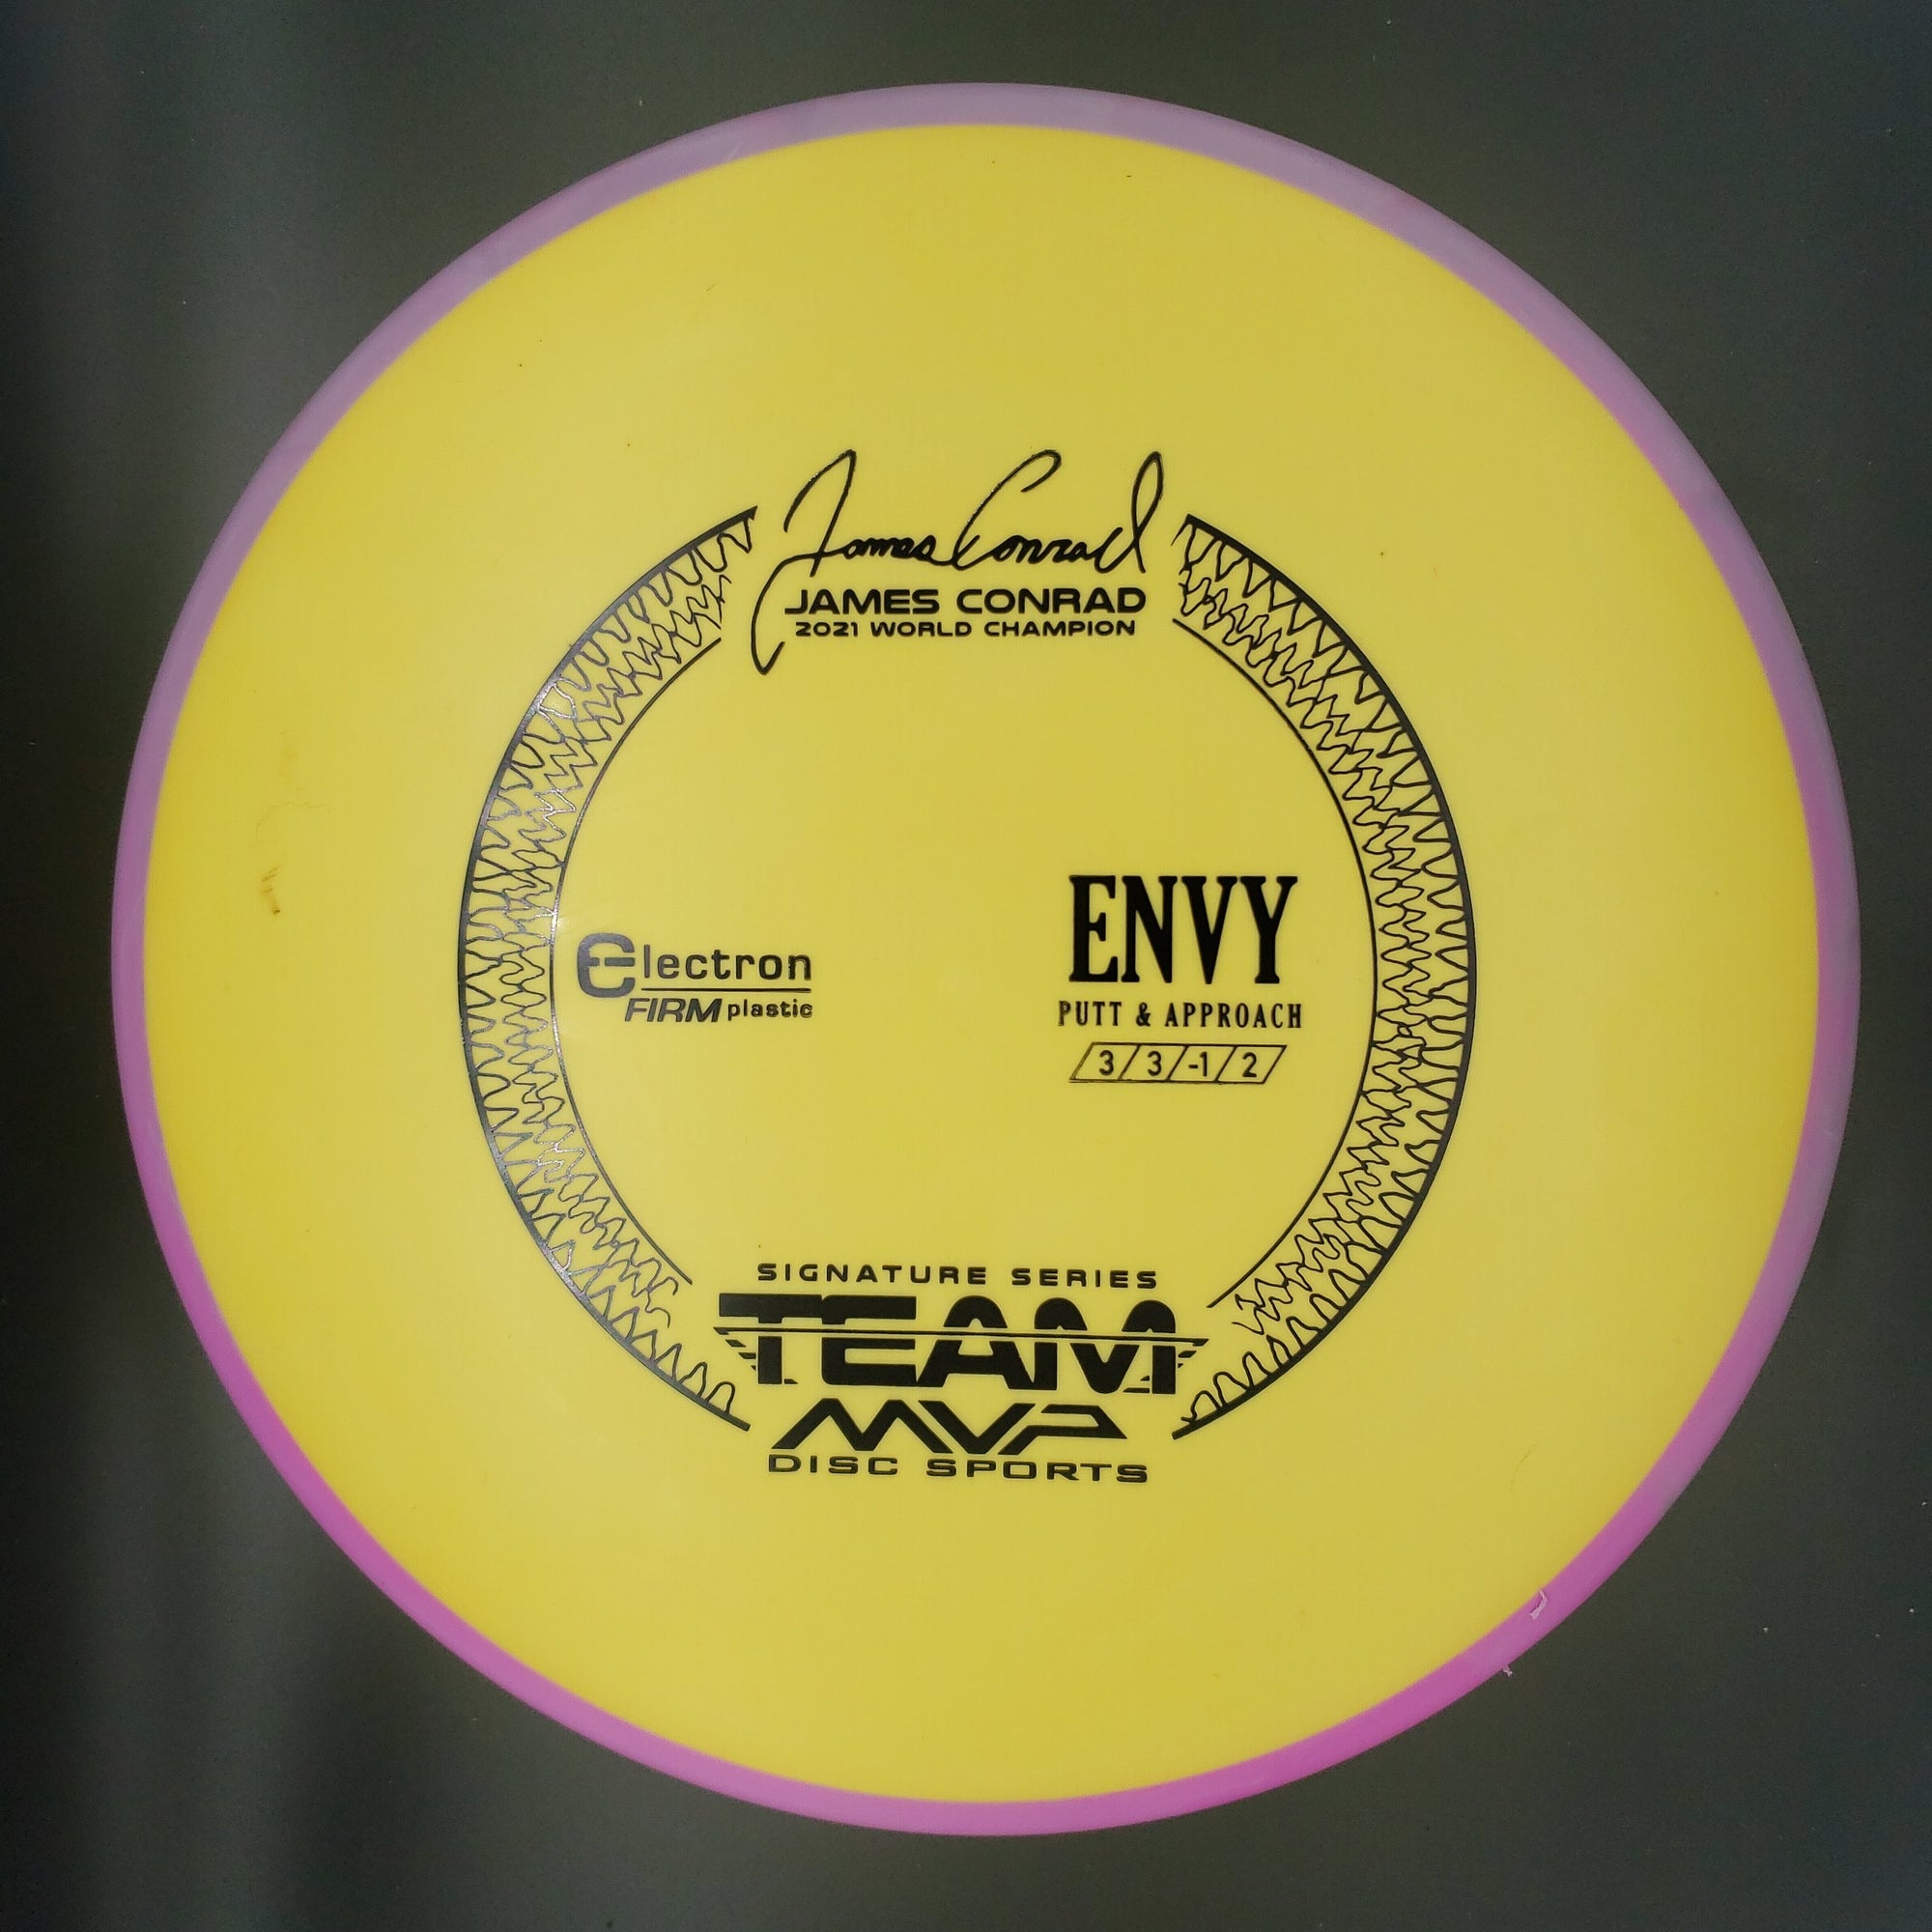 MVP Putter Purple/Pink Rim Yellow Plate 175g Products James Conrad Signature Envy, Electron Firm